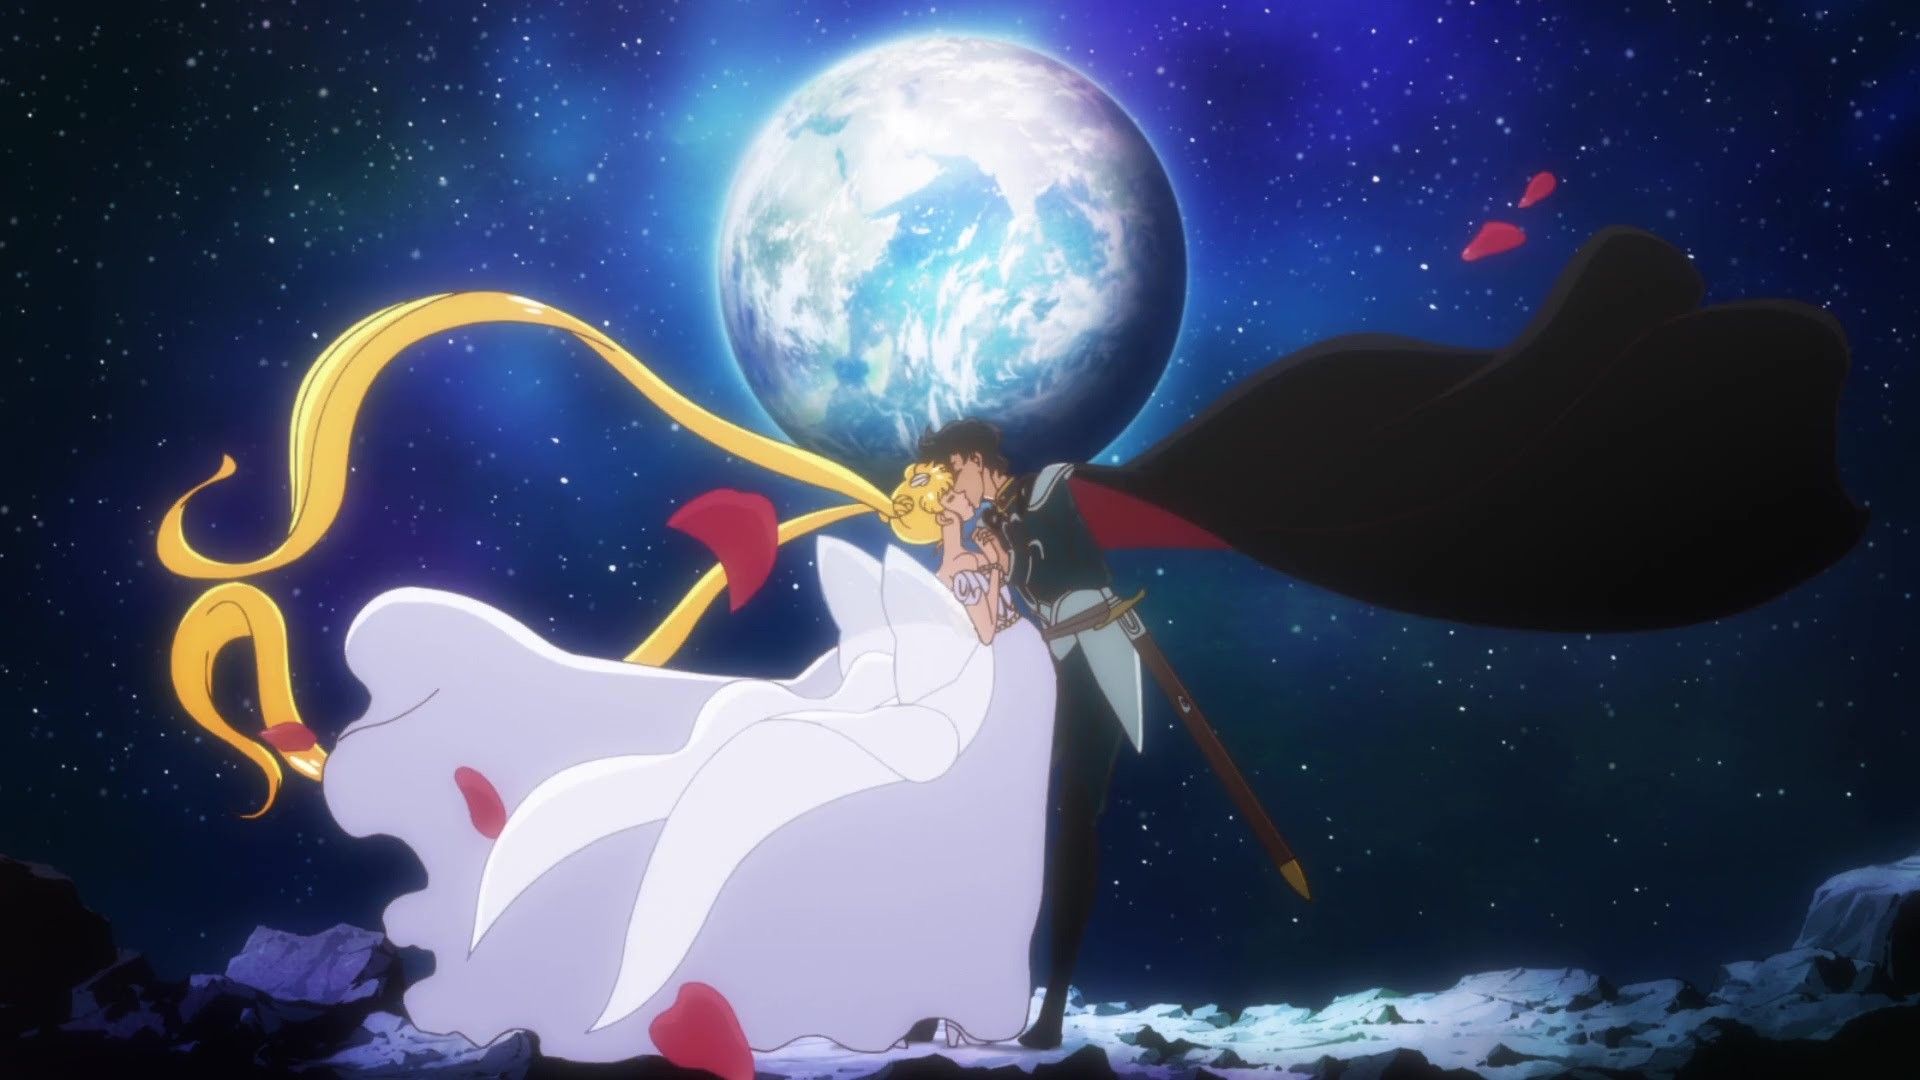 Anime couple standing in front of a moon - Sailor Moon